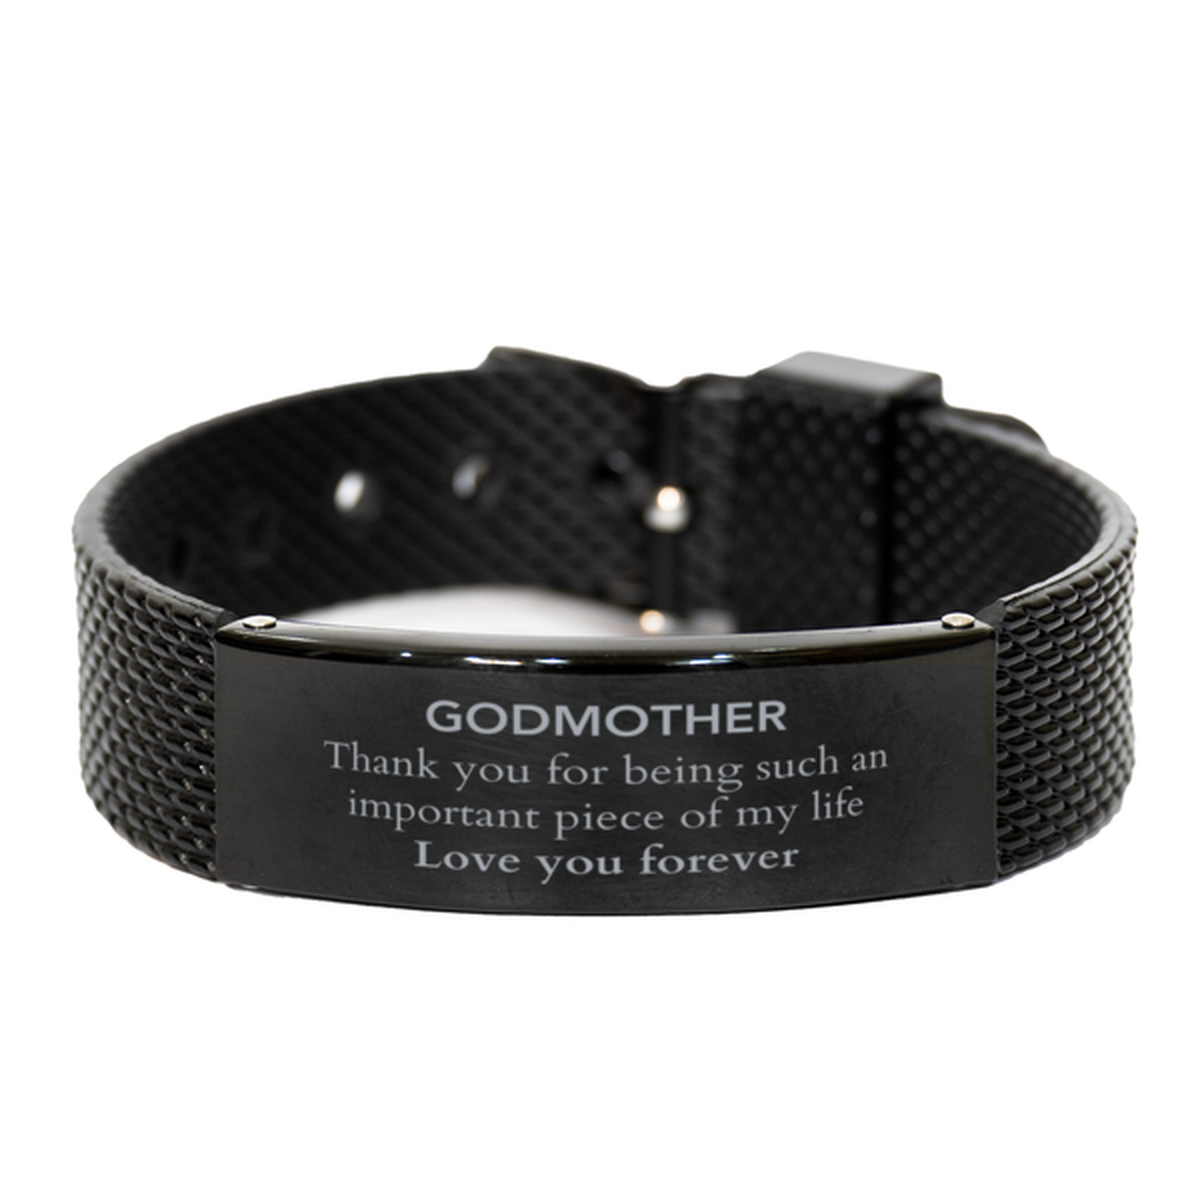 Appropriate Godmother Black Shark Mesh Bracelet Epic Birthday Gifts for Godmother Thank you for being such an important piece of my life Godmother Christmas Mothers Fathers Day